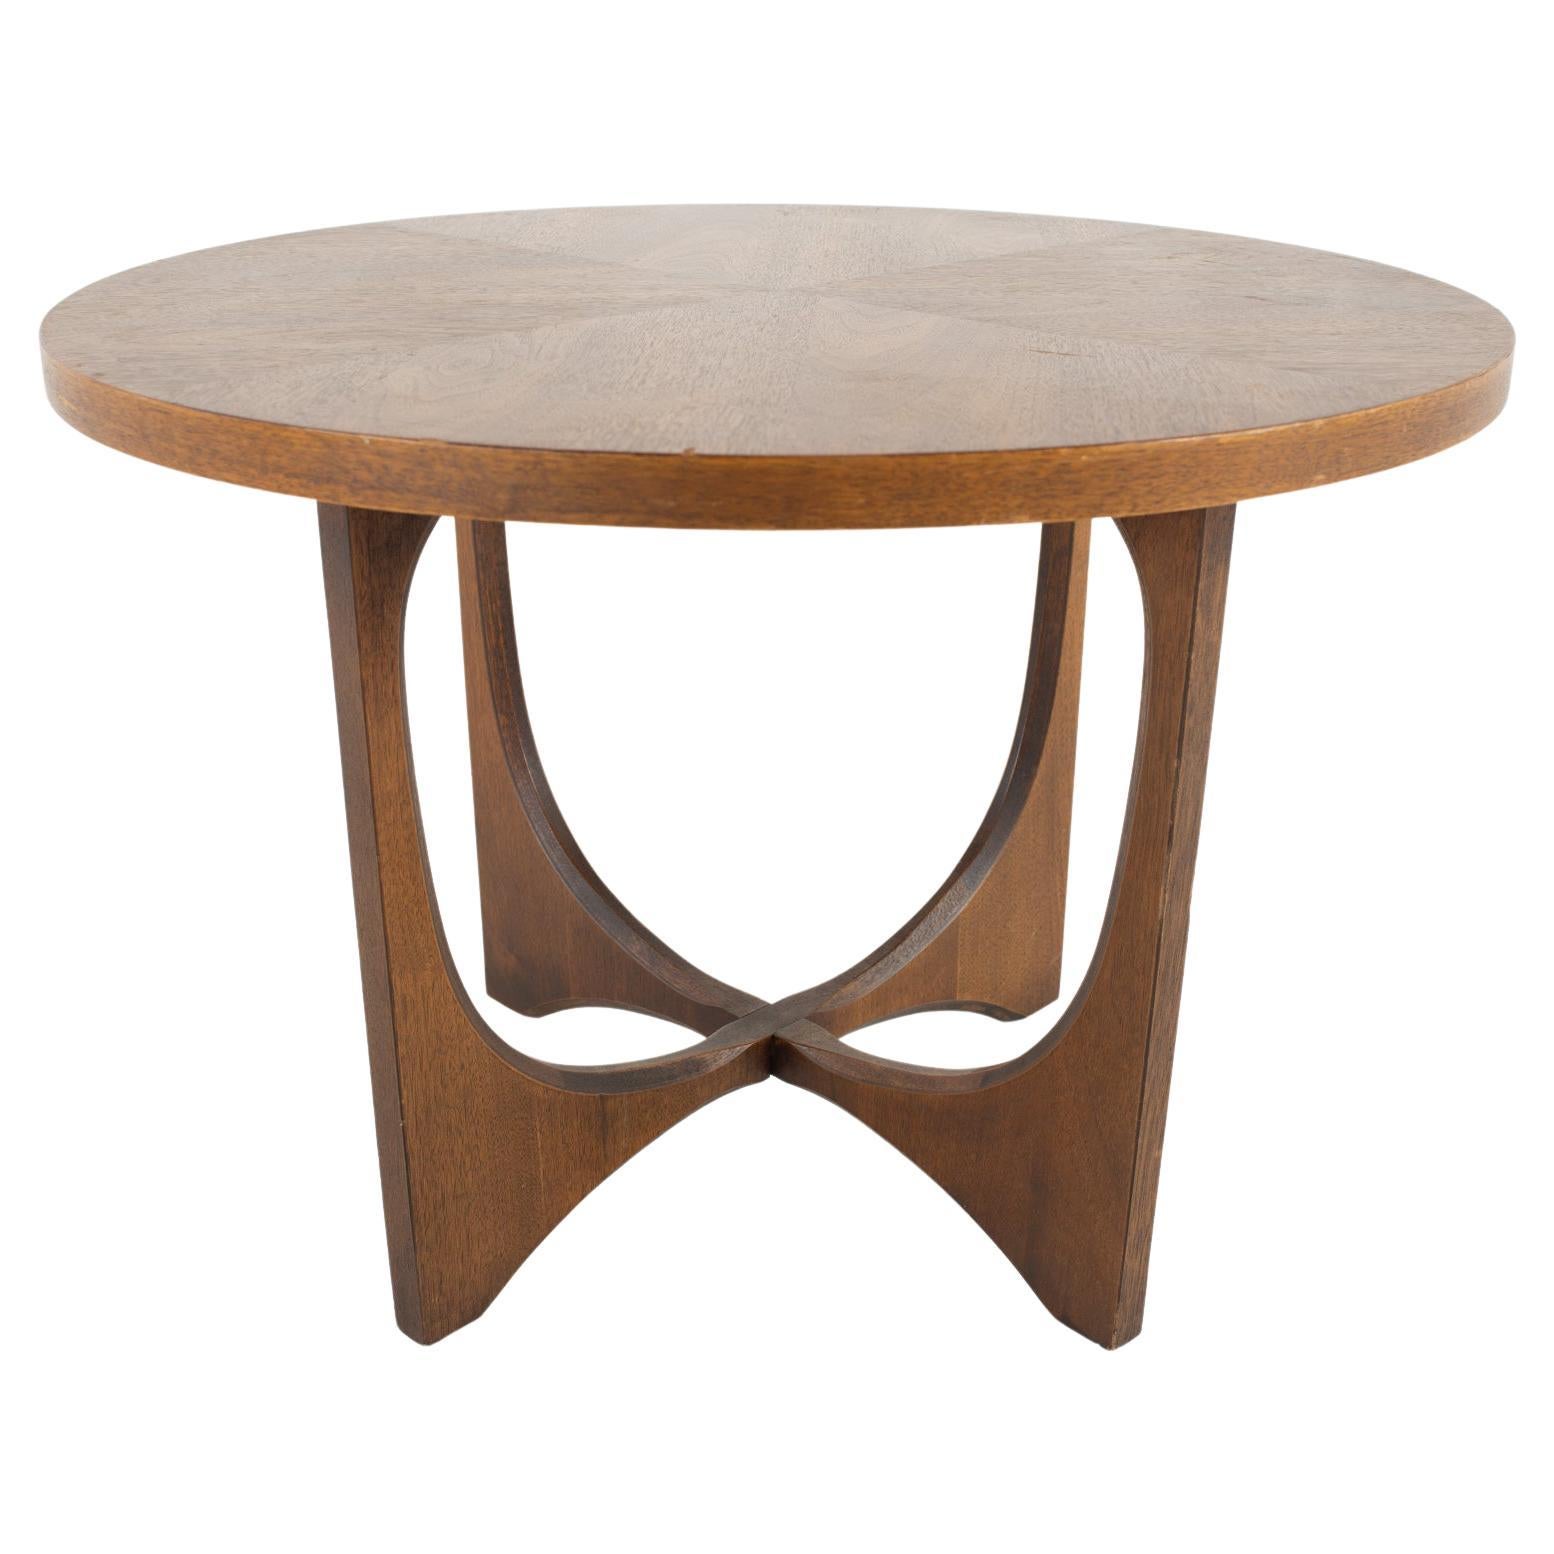 Broyhill Brasilia Brutalist mid century round walnut side end table 

This end table measures: 28 wide x 28 deep x 20 inches high

All pieces of furniture can be had in what we call restored vintage condition. That means the piece is restored